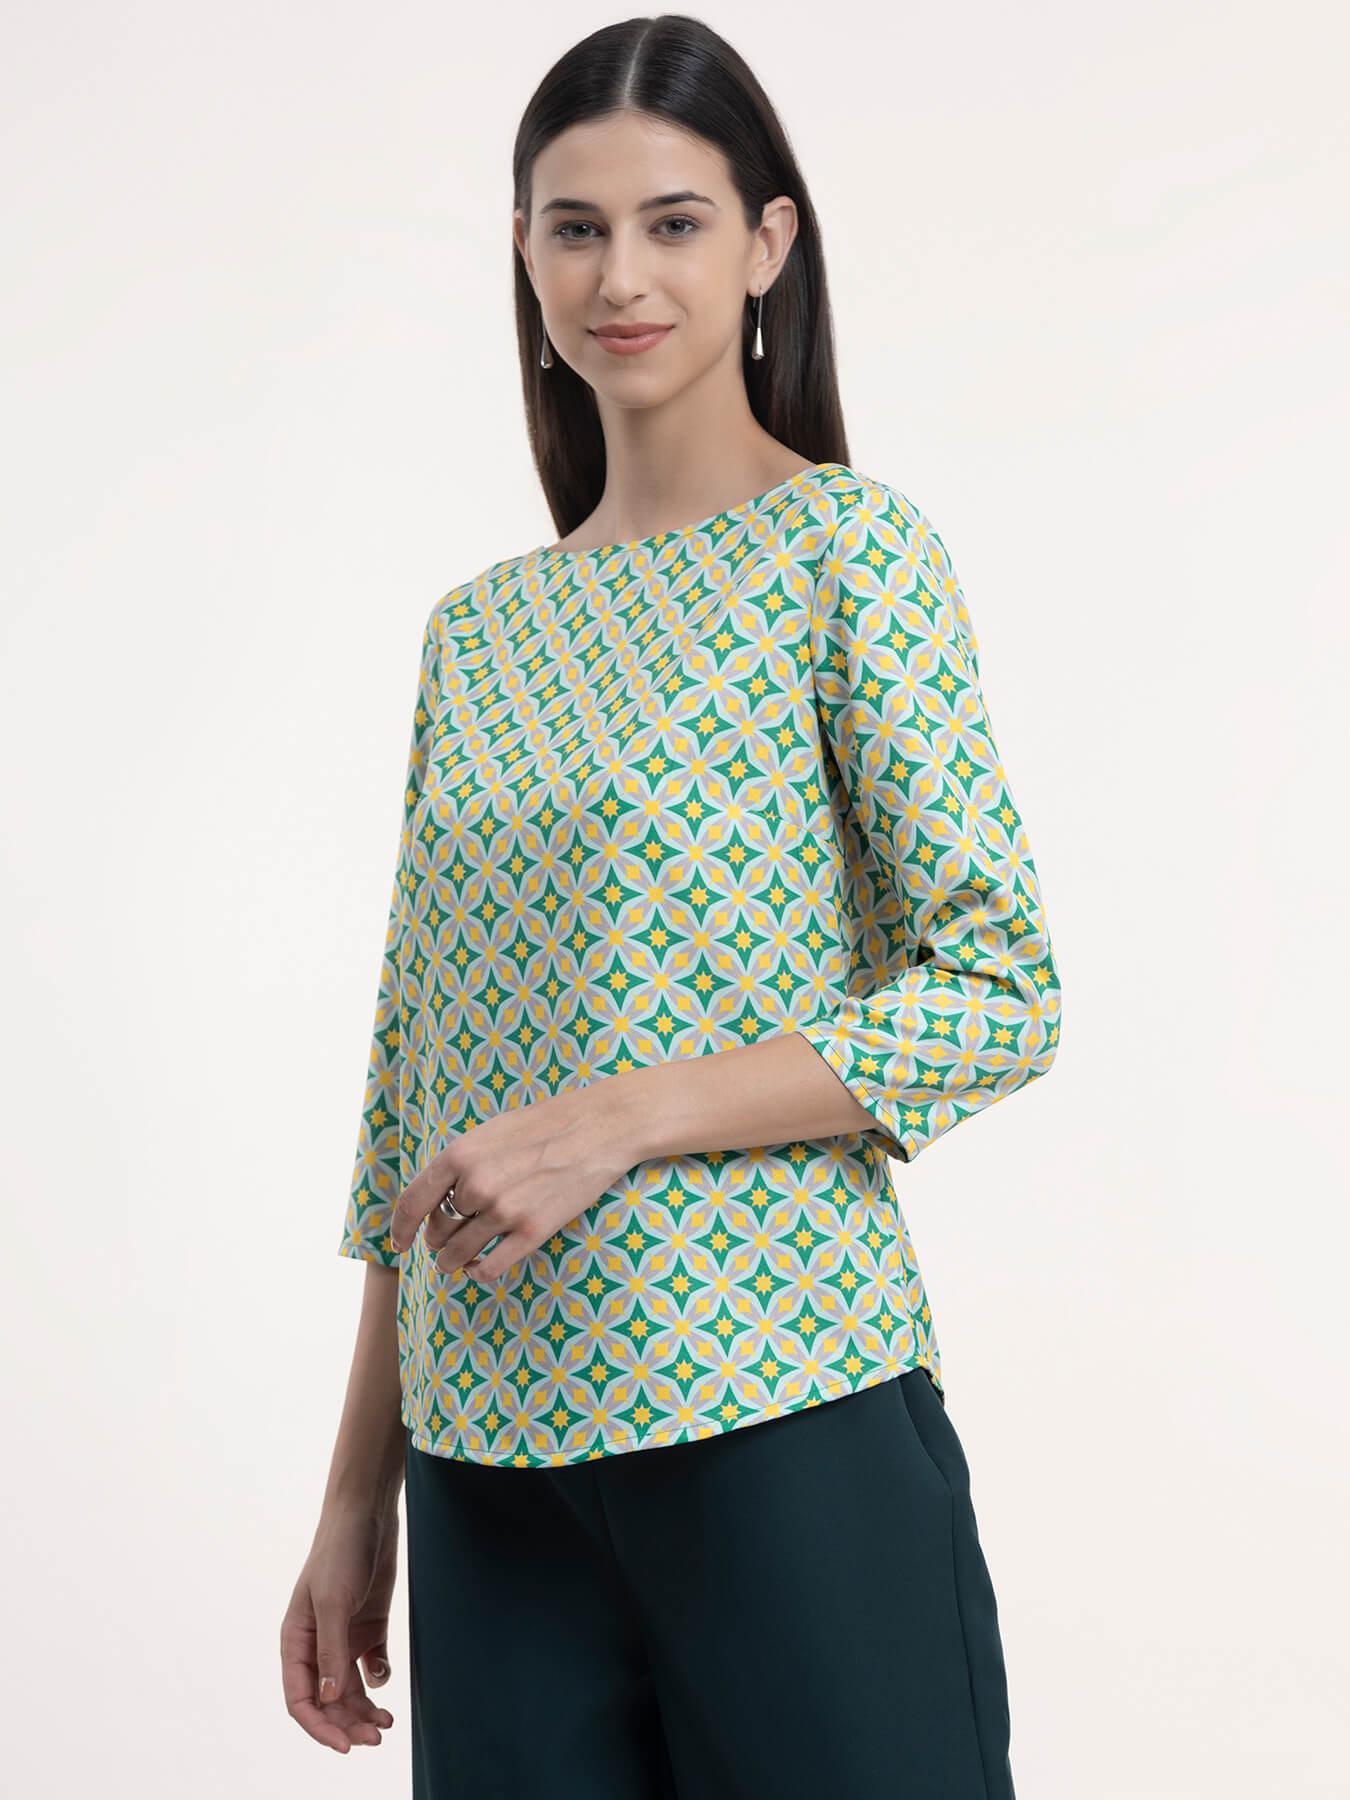 Boat Neck Top - Grey and Green| Formal Tops